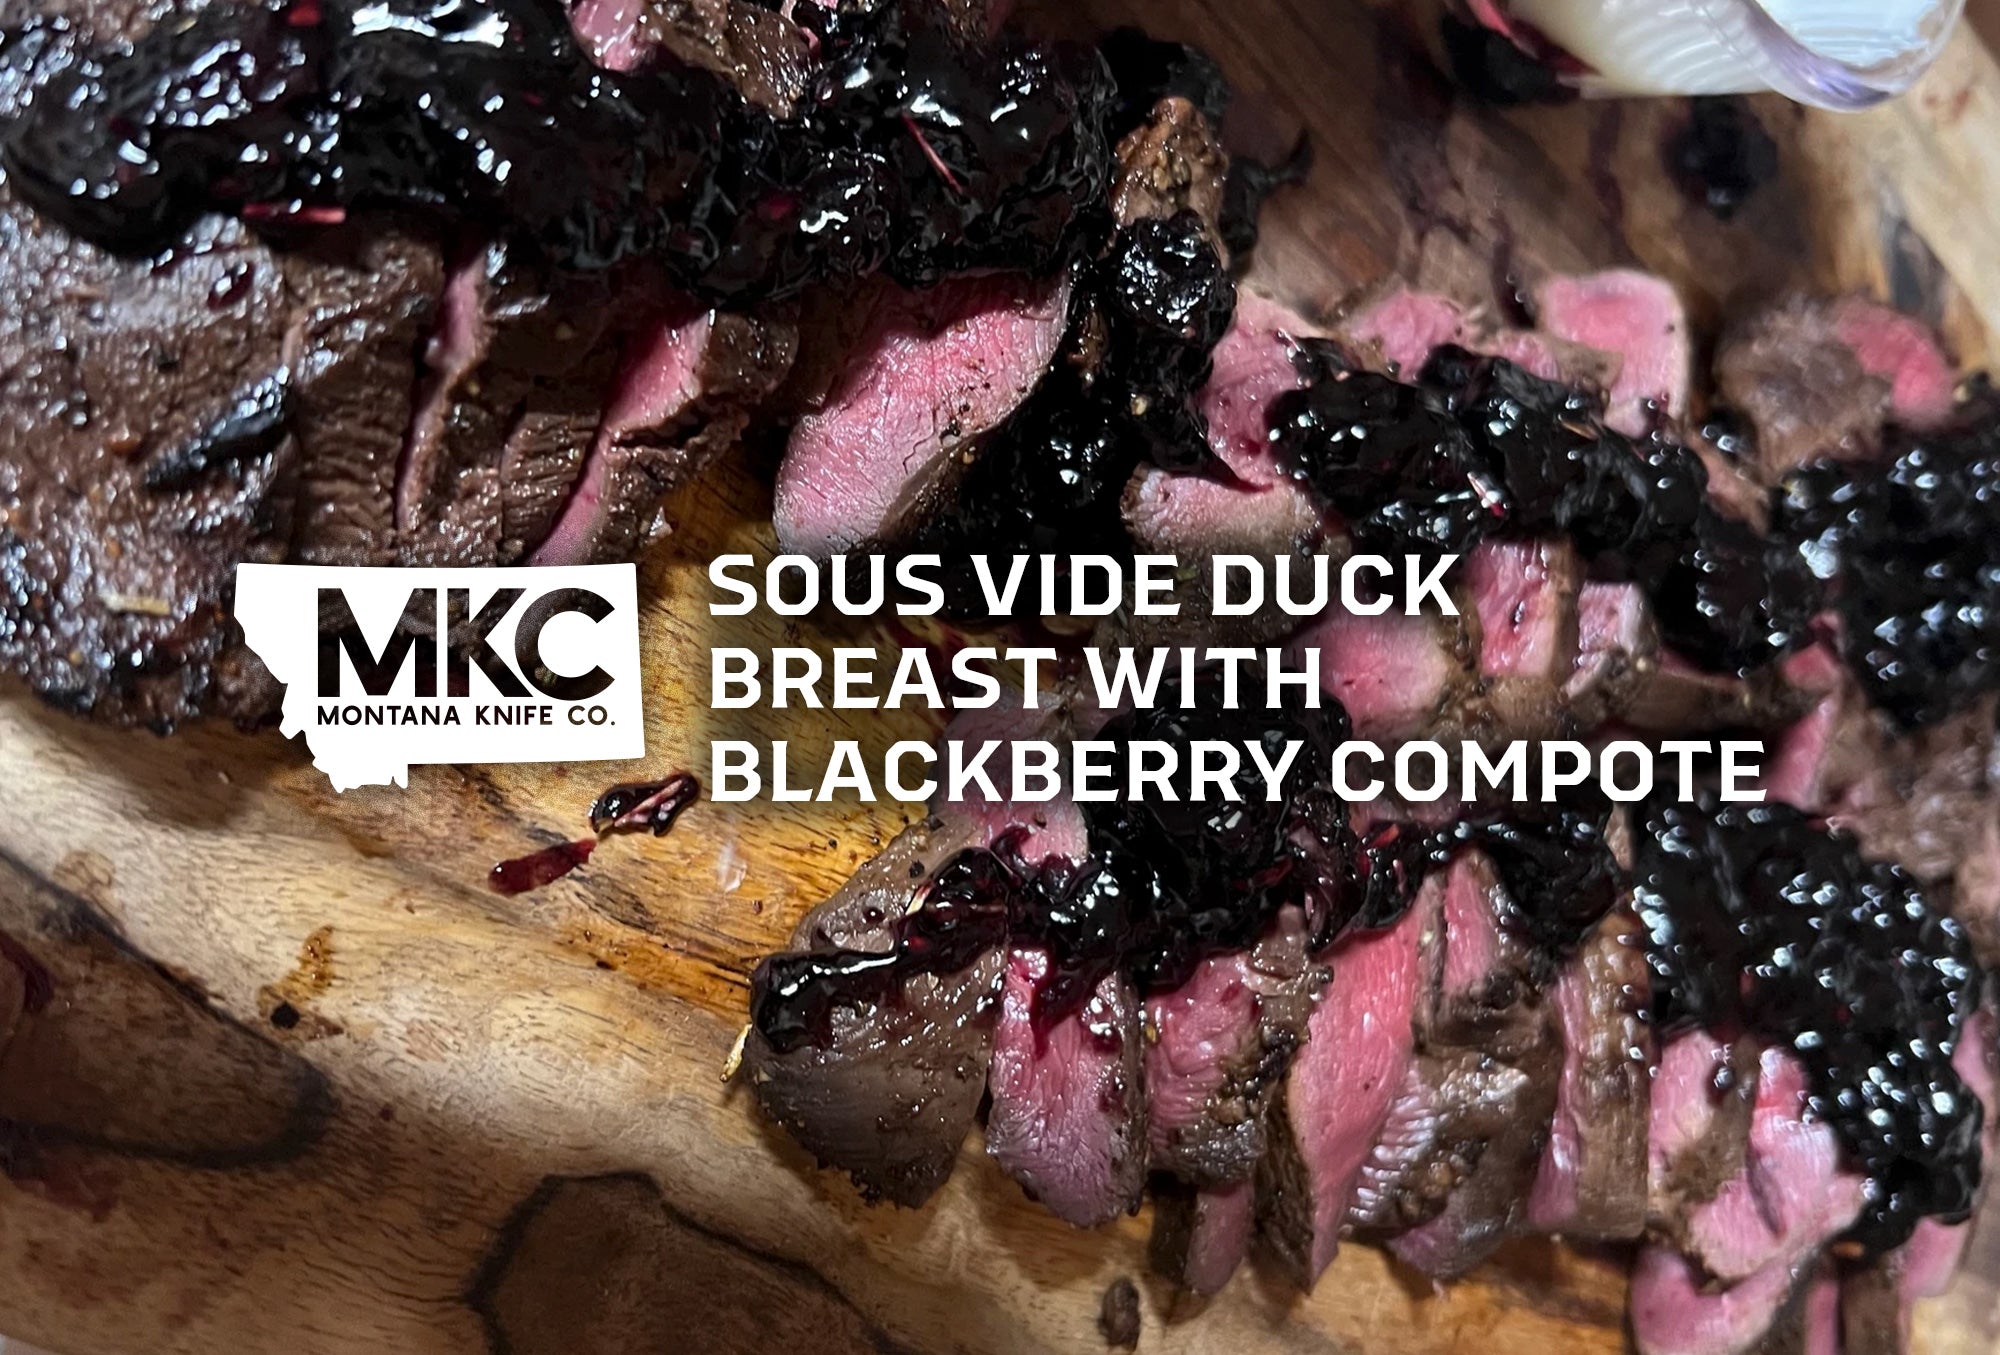 A sliced Sous Vide Duck Breast With Blackberry Compote rests on a wooden cutting board.